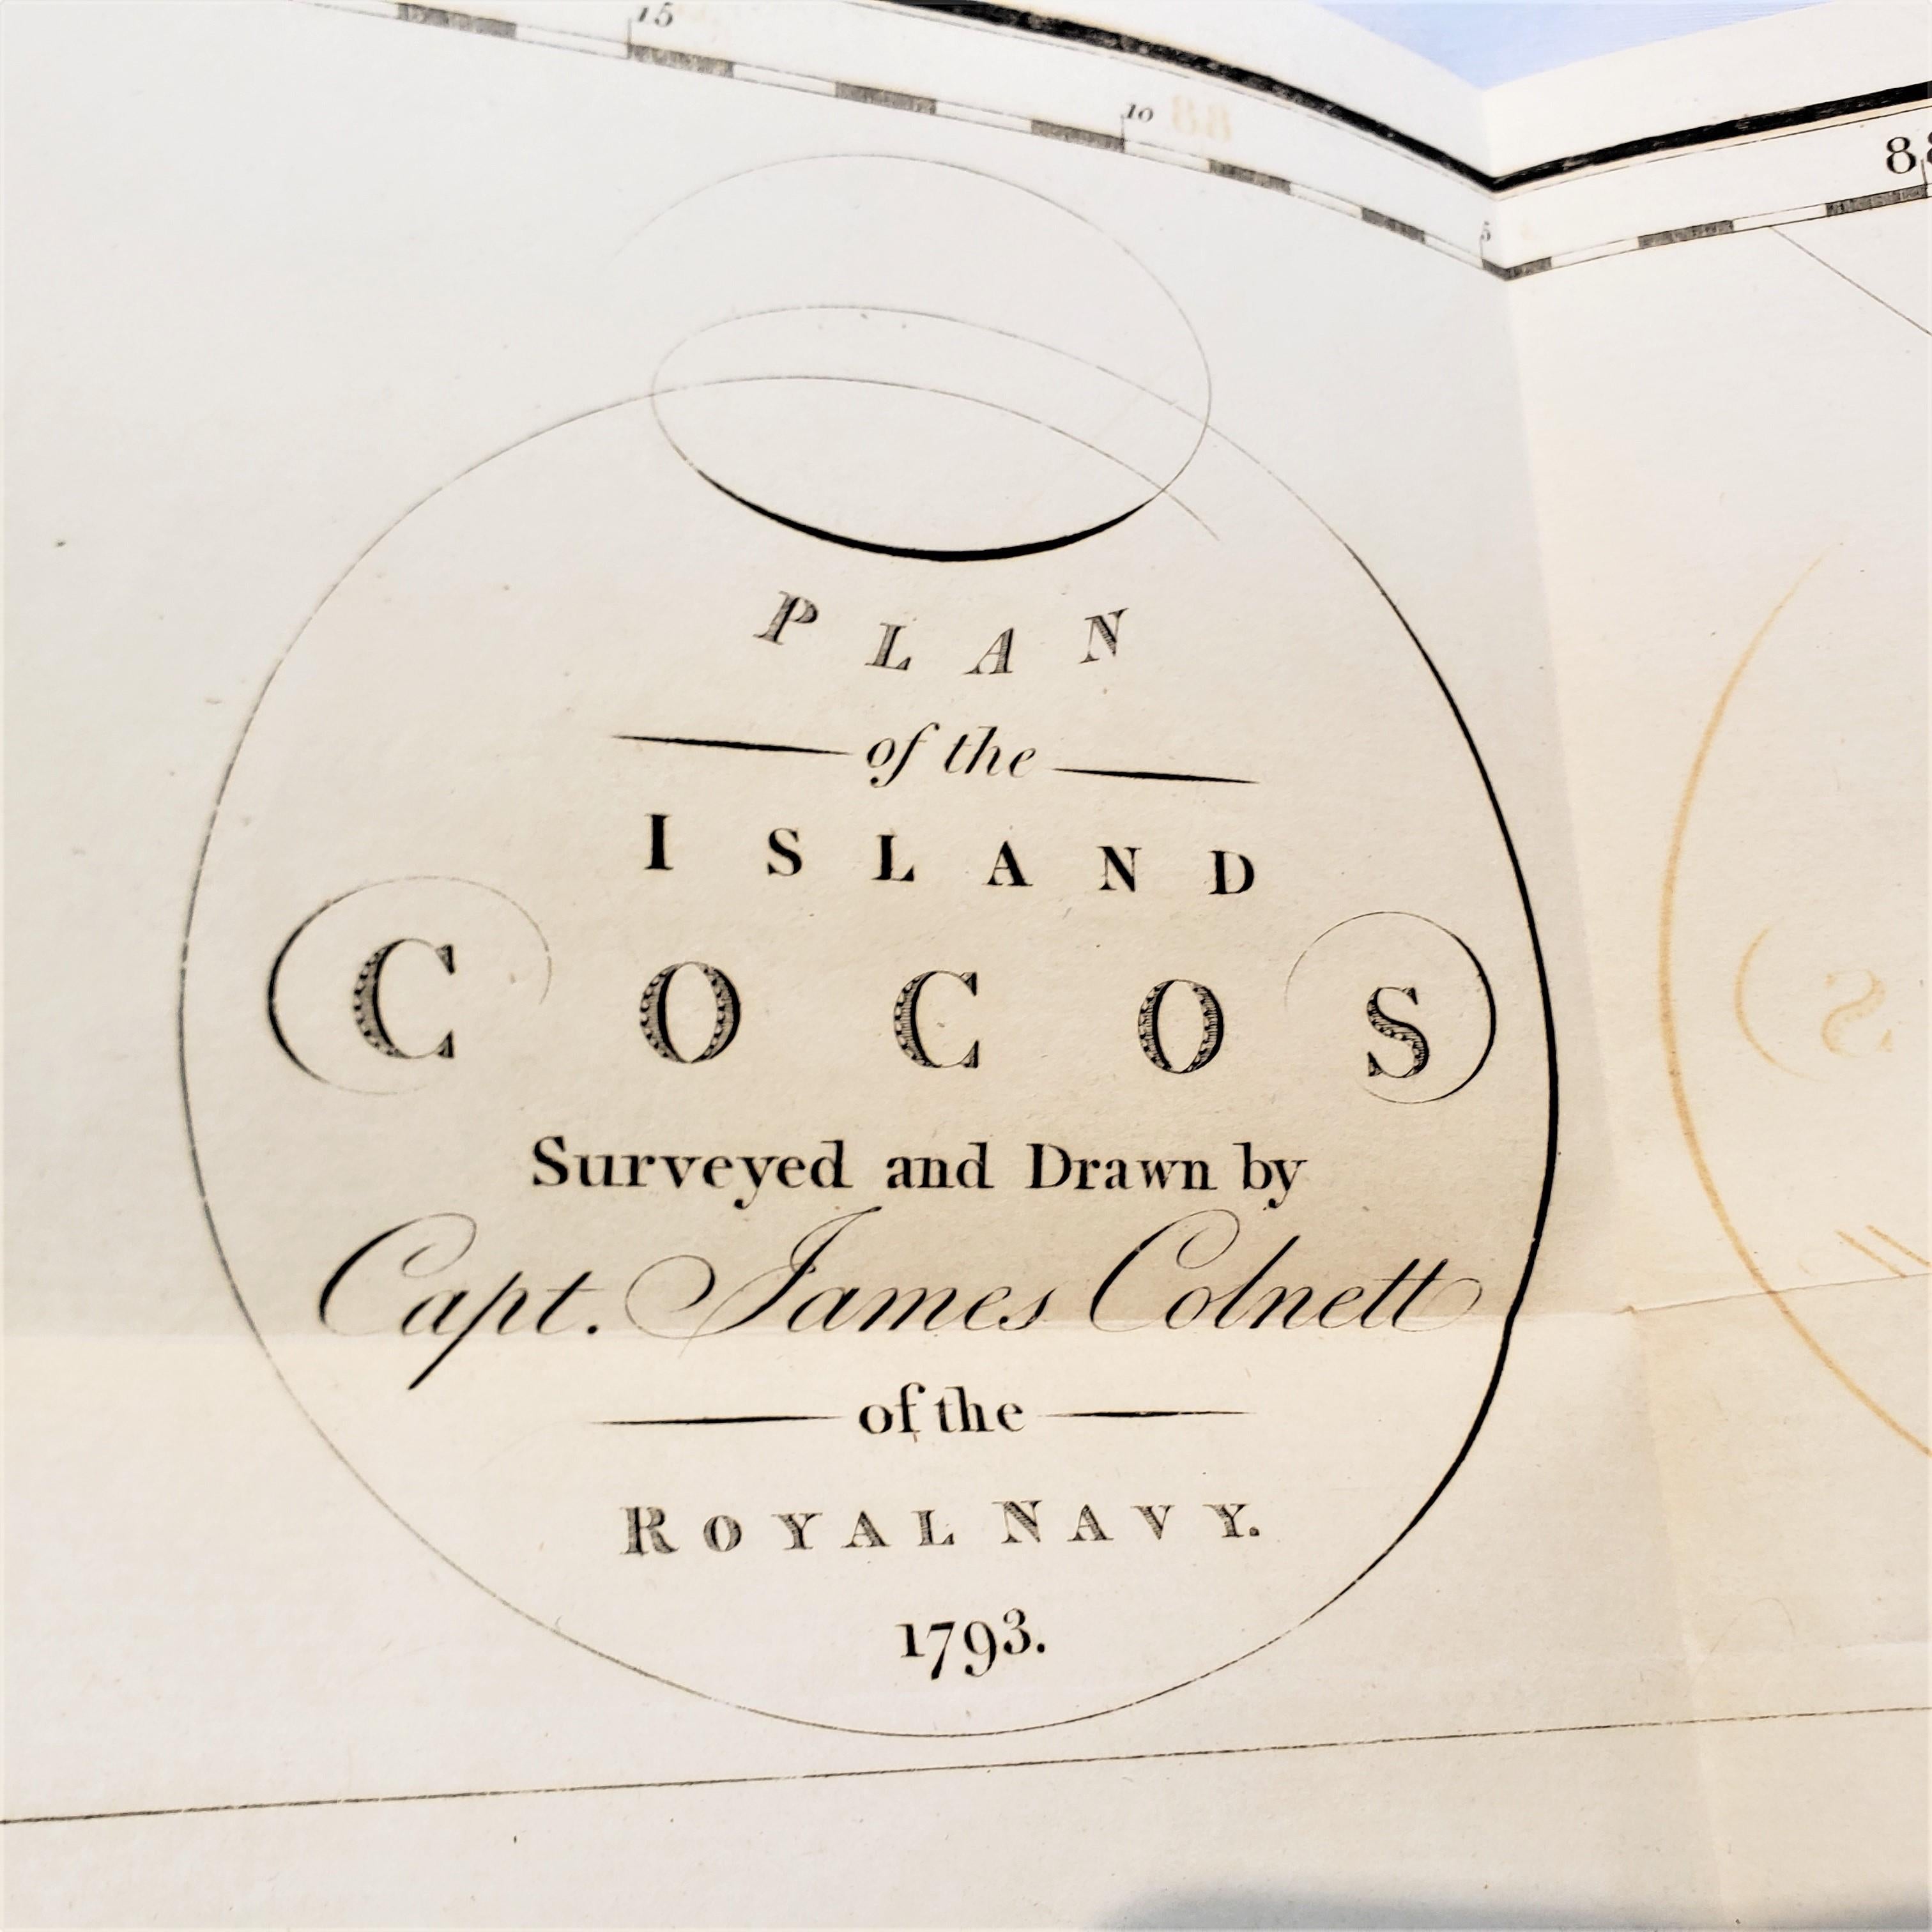 Antikes James Colnett-Buch „A Voyage to the South Atlantic & Round Cape“, 1798 im Angebot 4